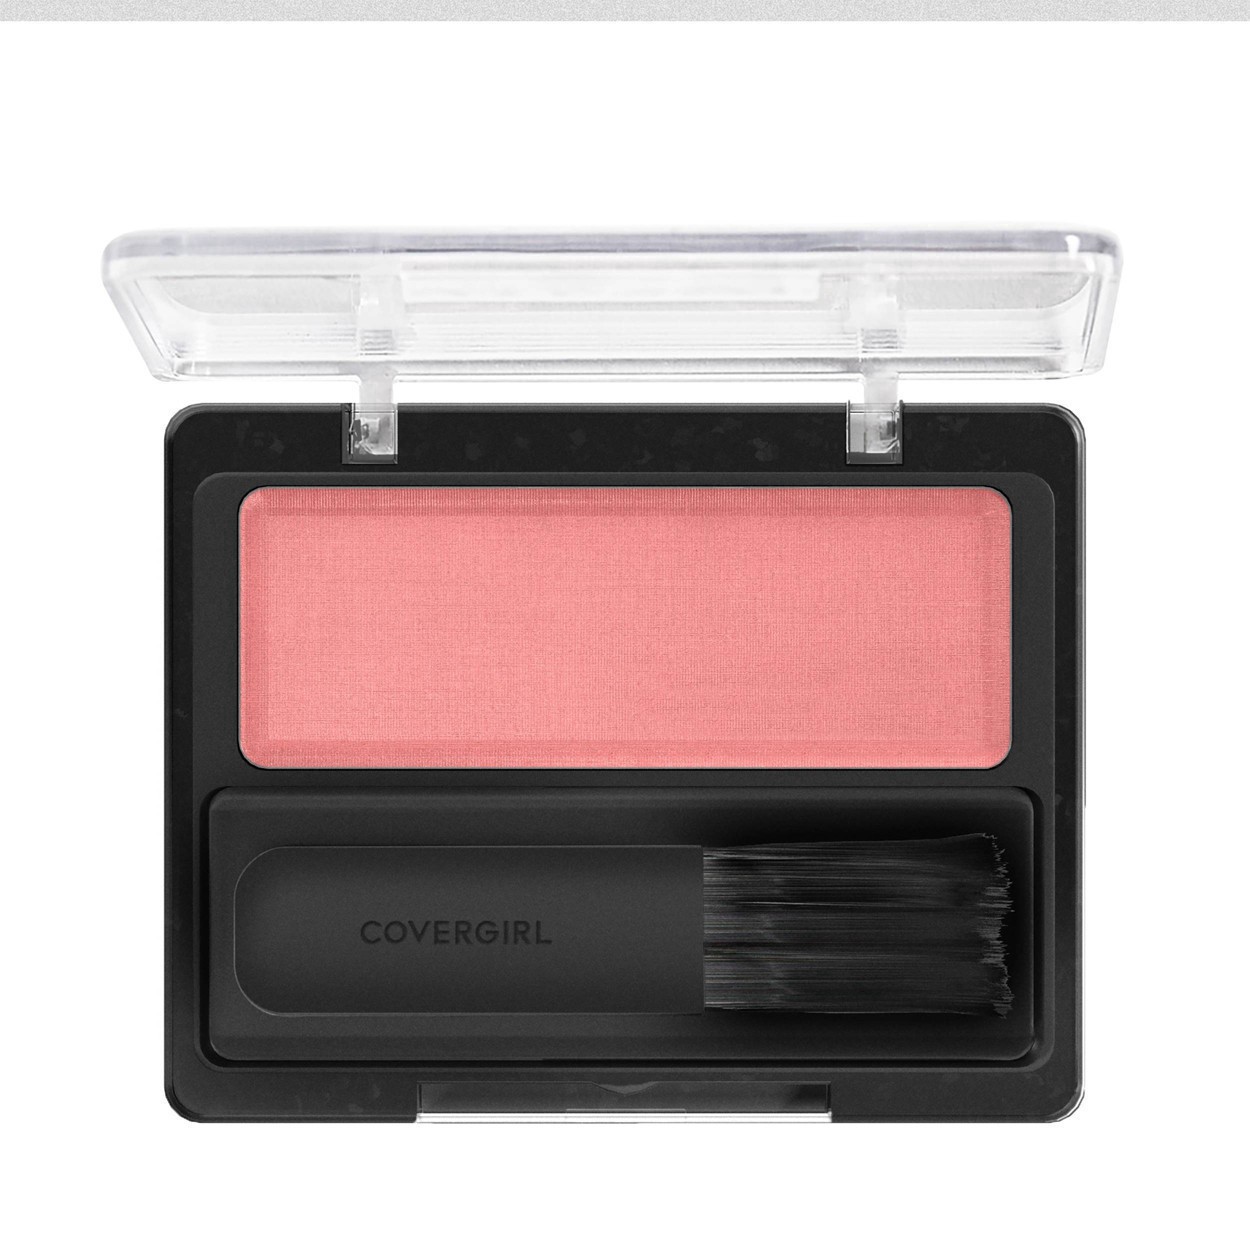 slide 38 of 42, COTY COVERGIRL COVERGIRL Classic Color Blush Rose Silk, 1 ct